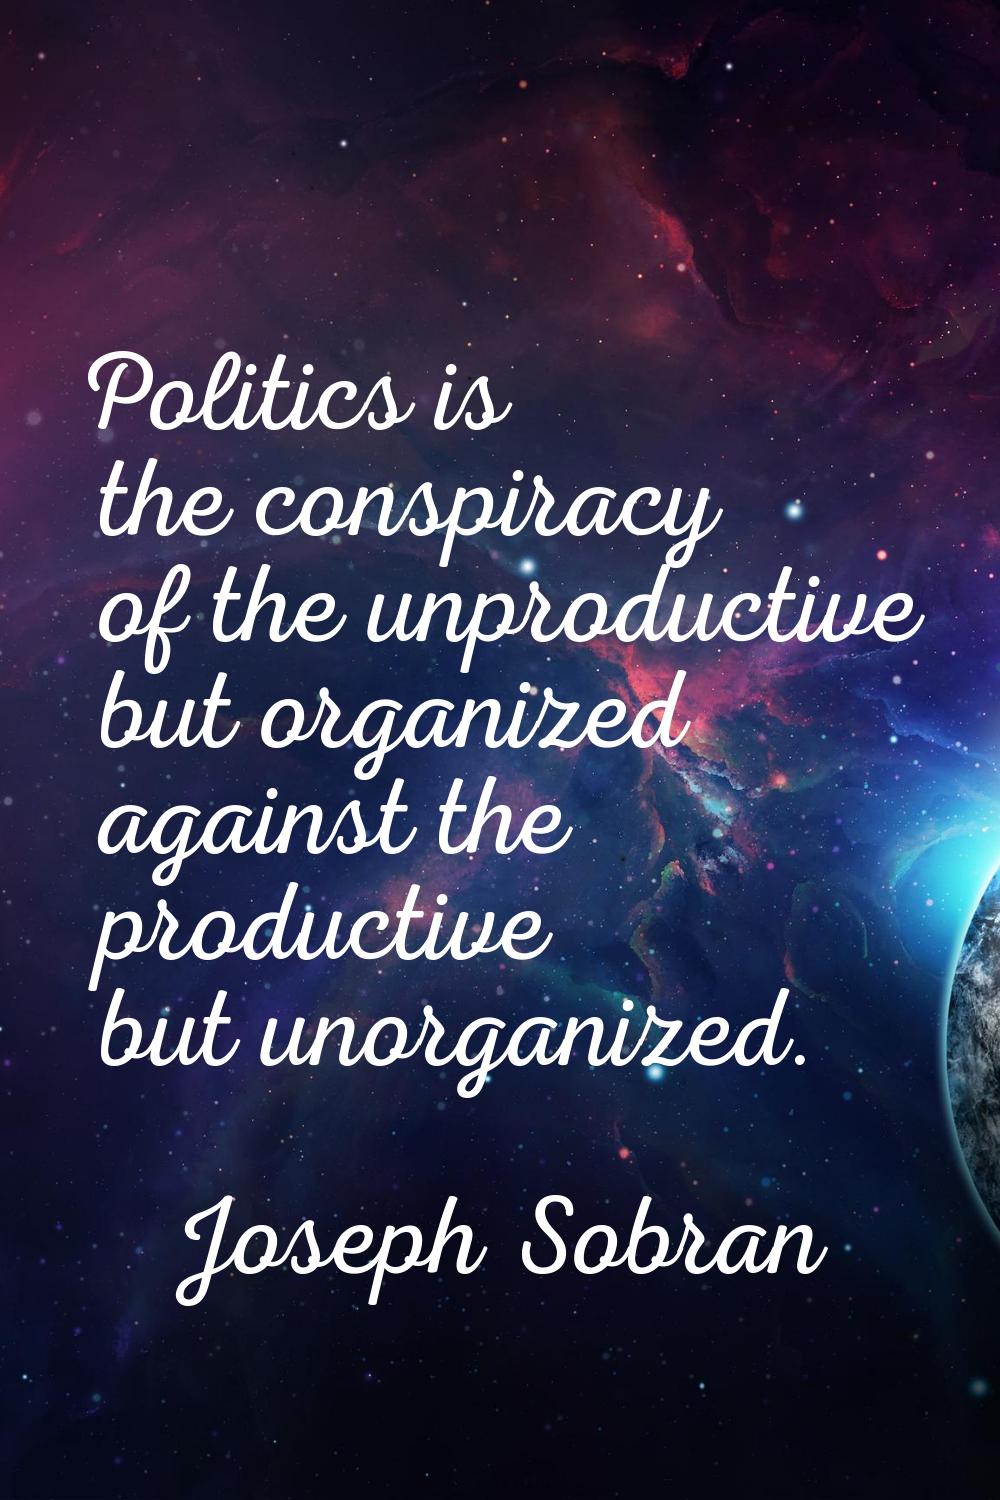 Politics is the conspiracy of the unproductive but organized against the productive but unorganized